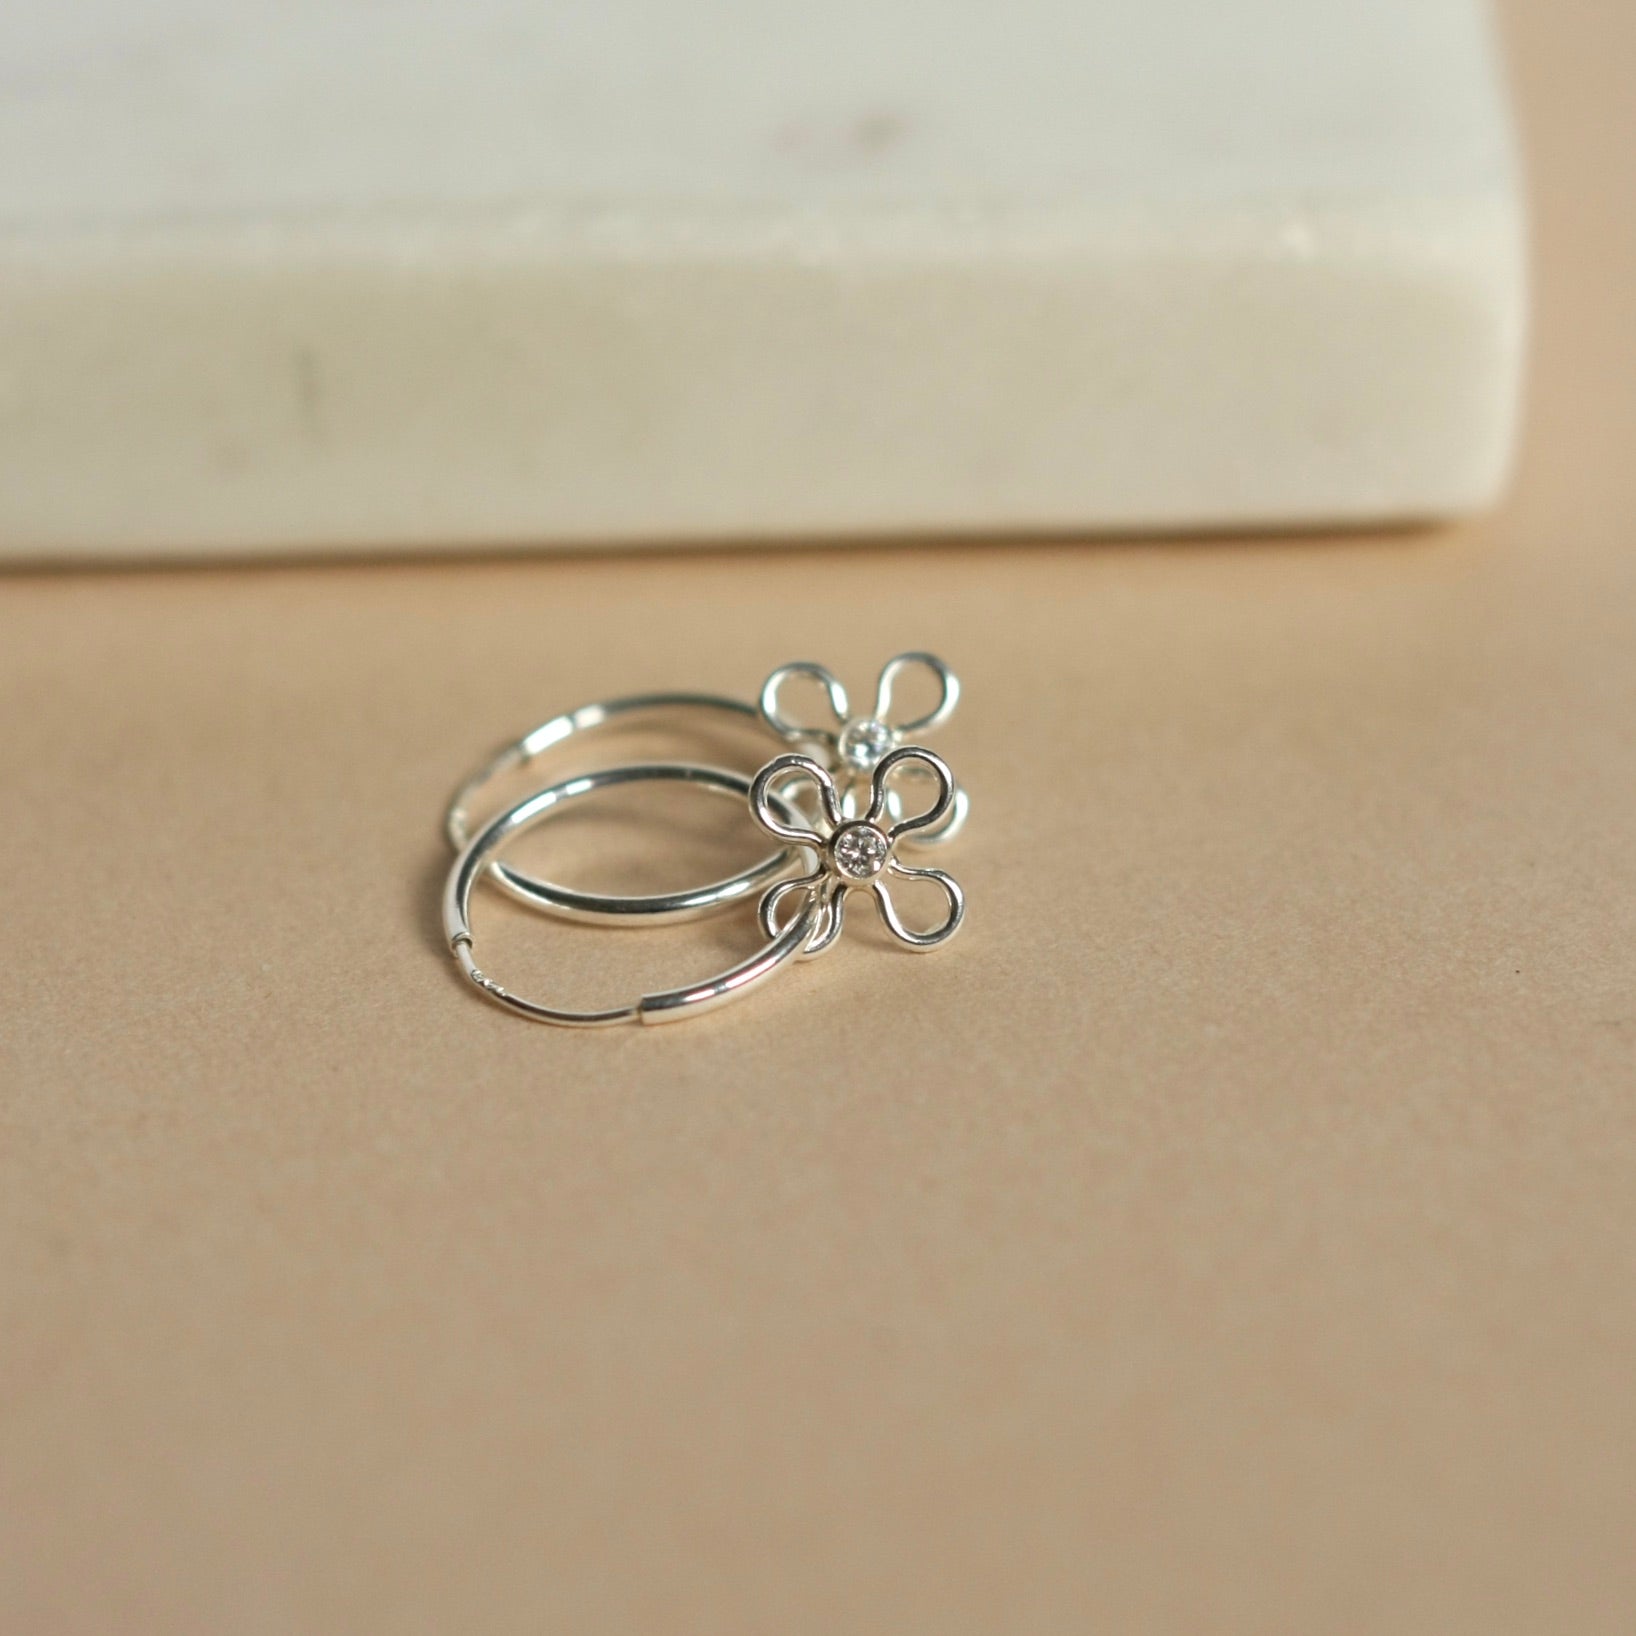 Small Silver Endless Hoops With Detachable Flower